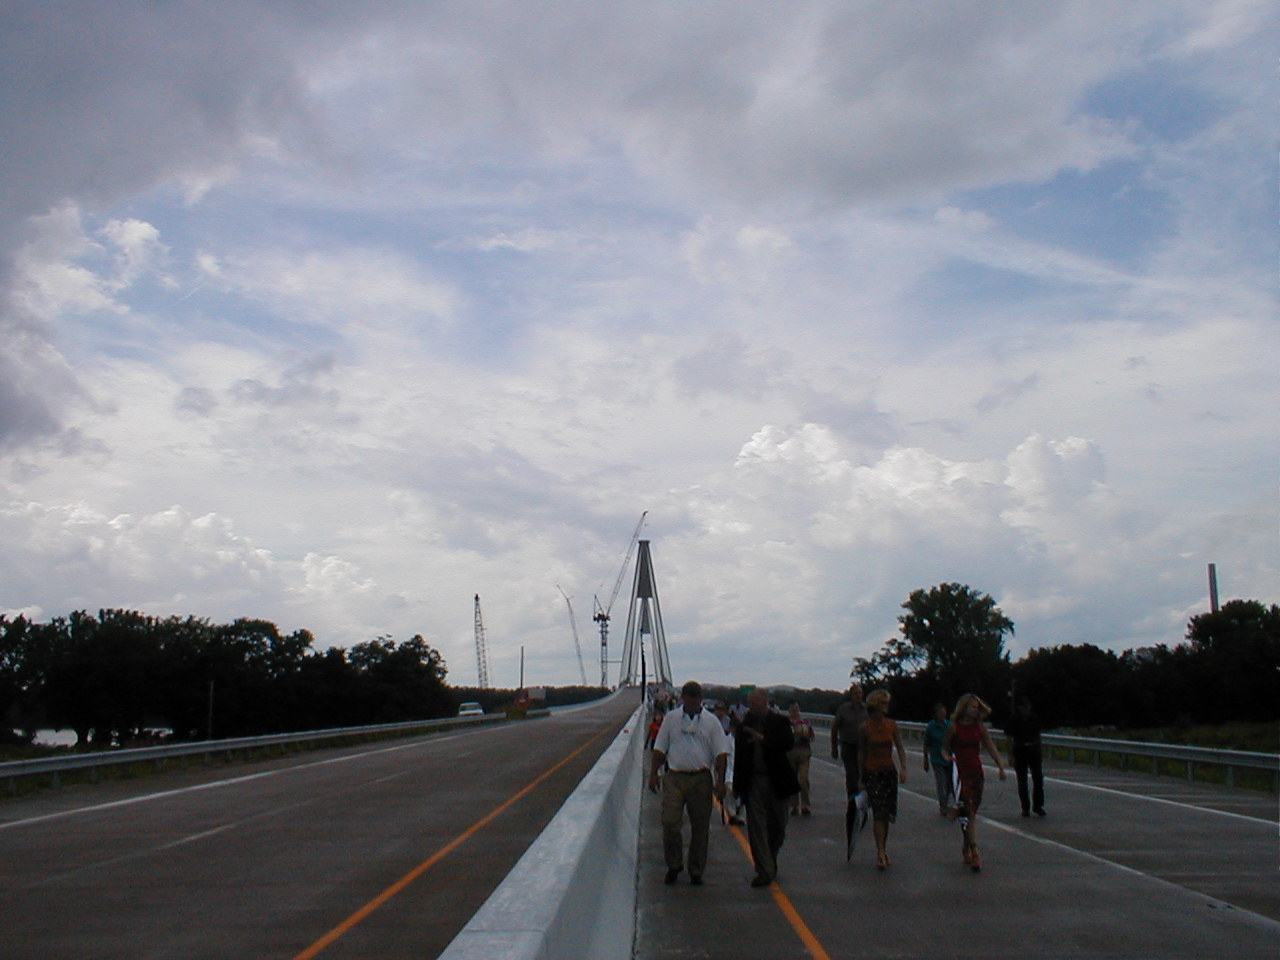 Looking north across the bridge from the Kentucky landing.